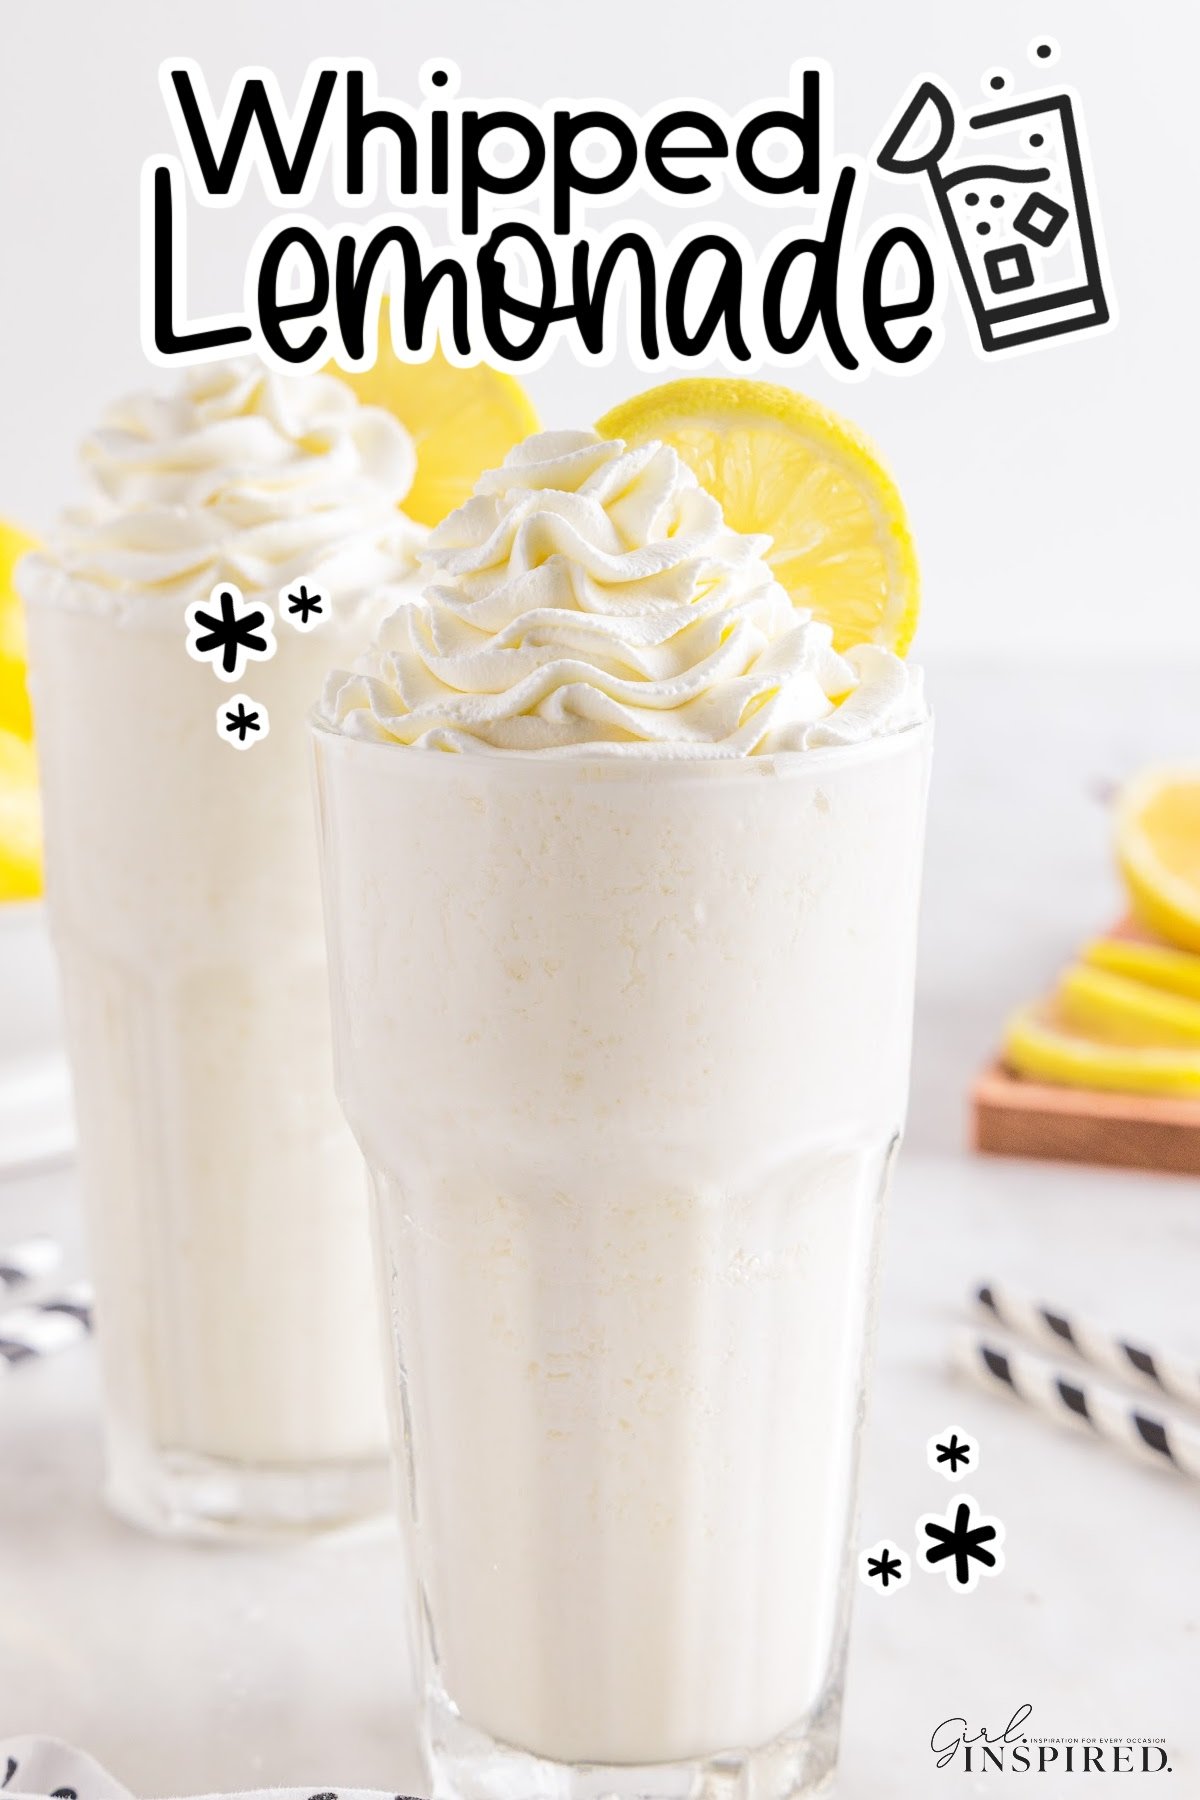 Two glasses of whipped lemonade with lemon wheels and text overlay.